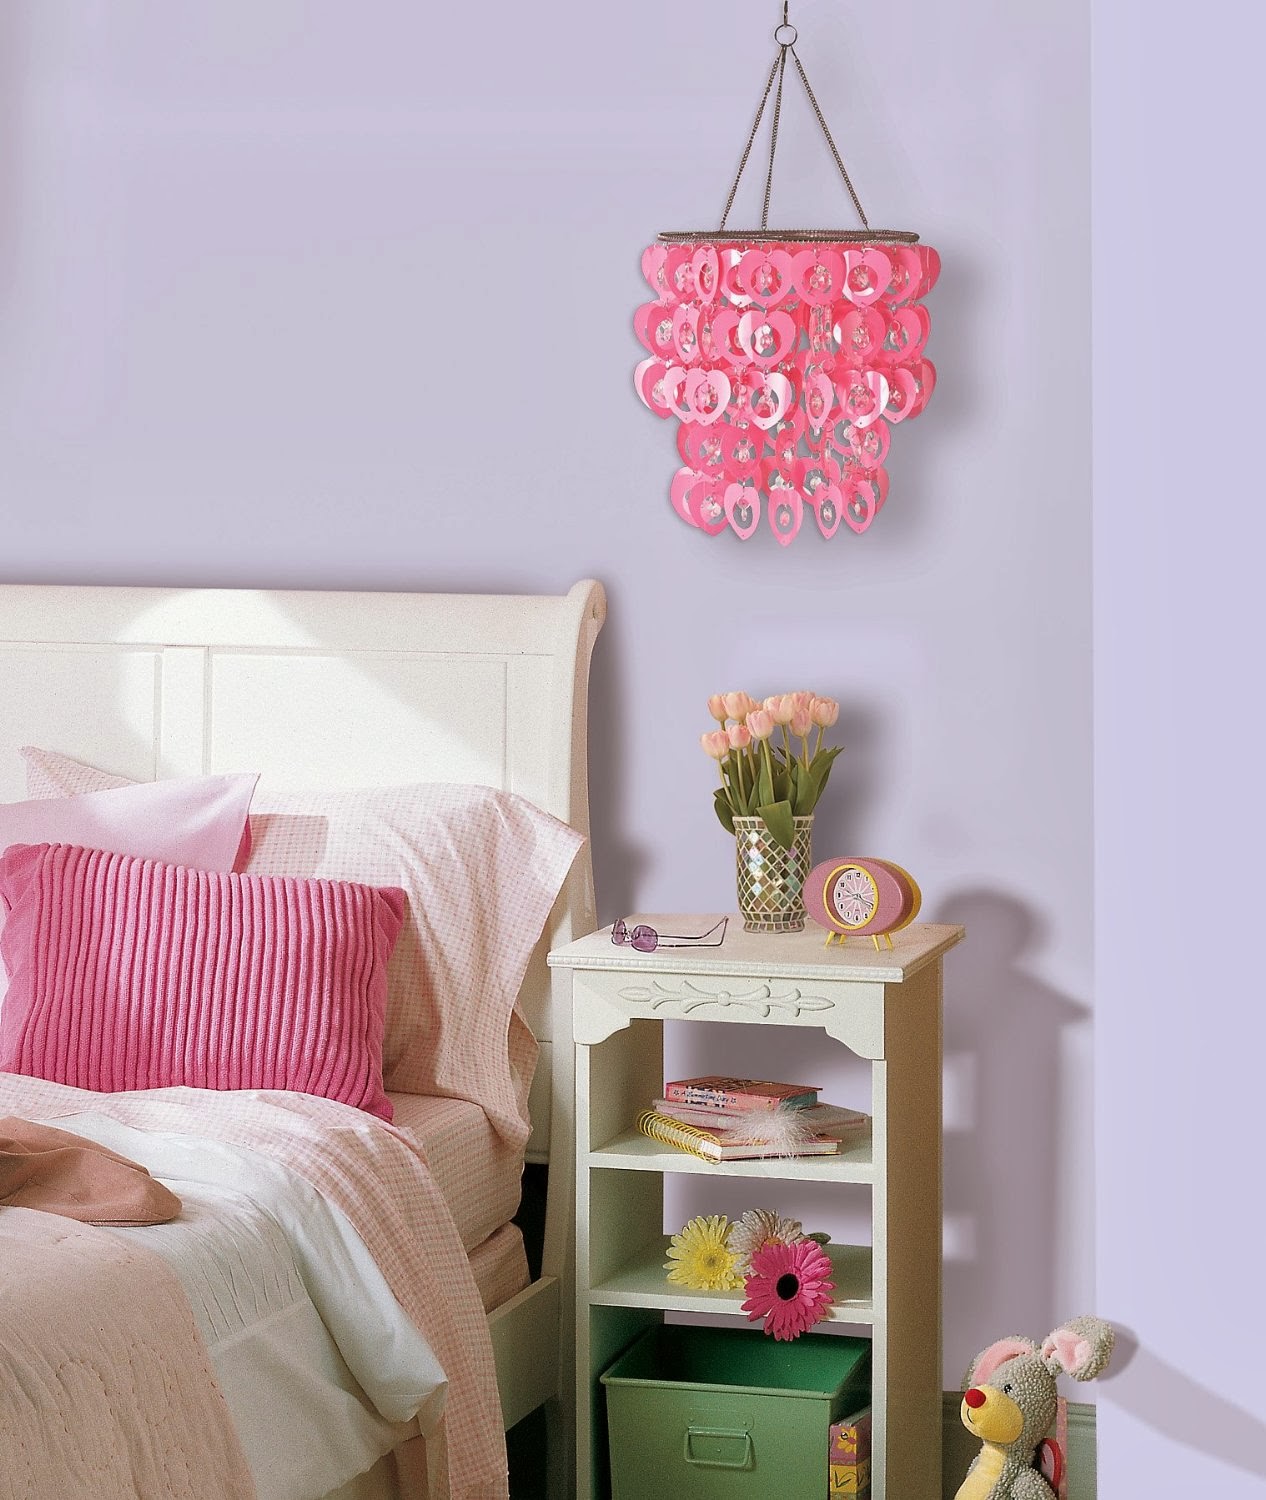 Pink Pendant Natty Comely Pink Pendant Lamp In Natty Teen Girl Room Ideas With Grey Wall Paint Color Interior Design Beautiful Teen Girl Room Interior Design Embellished With Charming Wall Decor